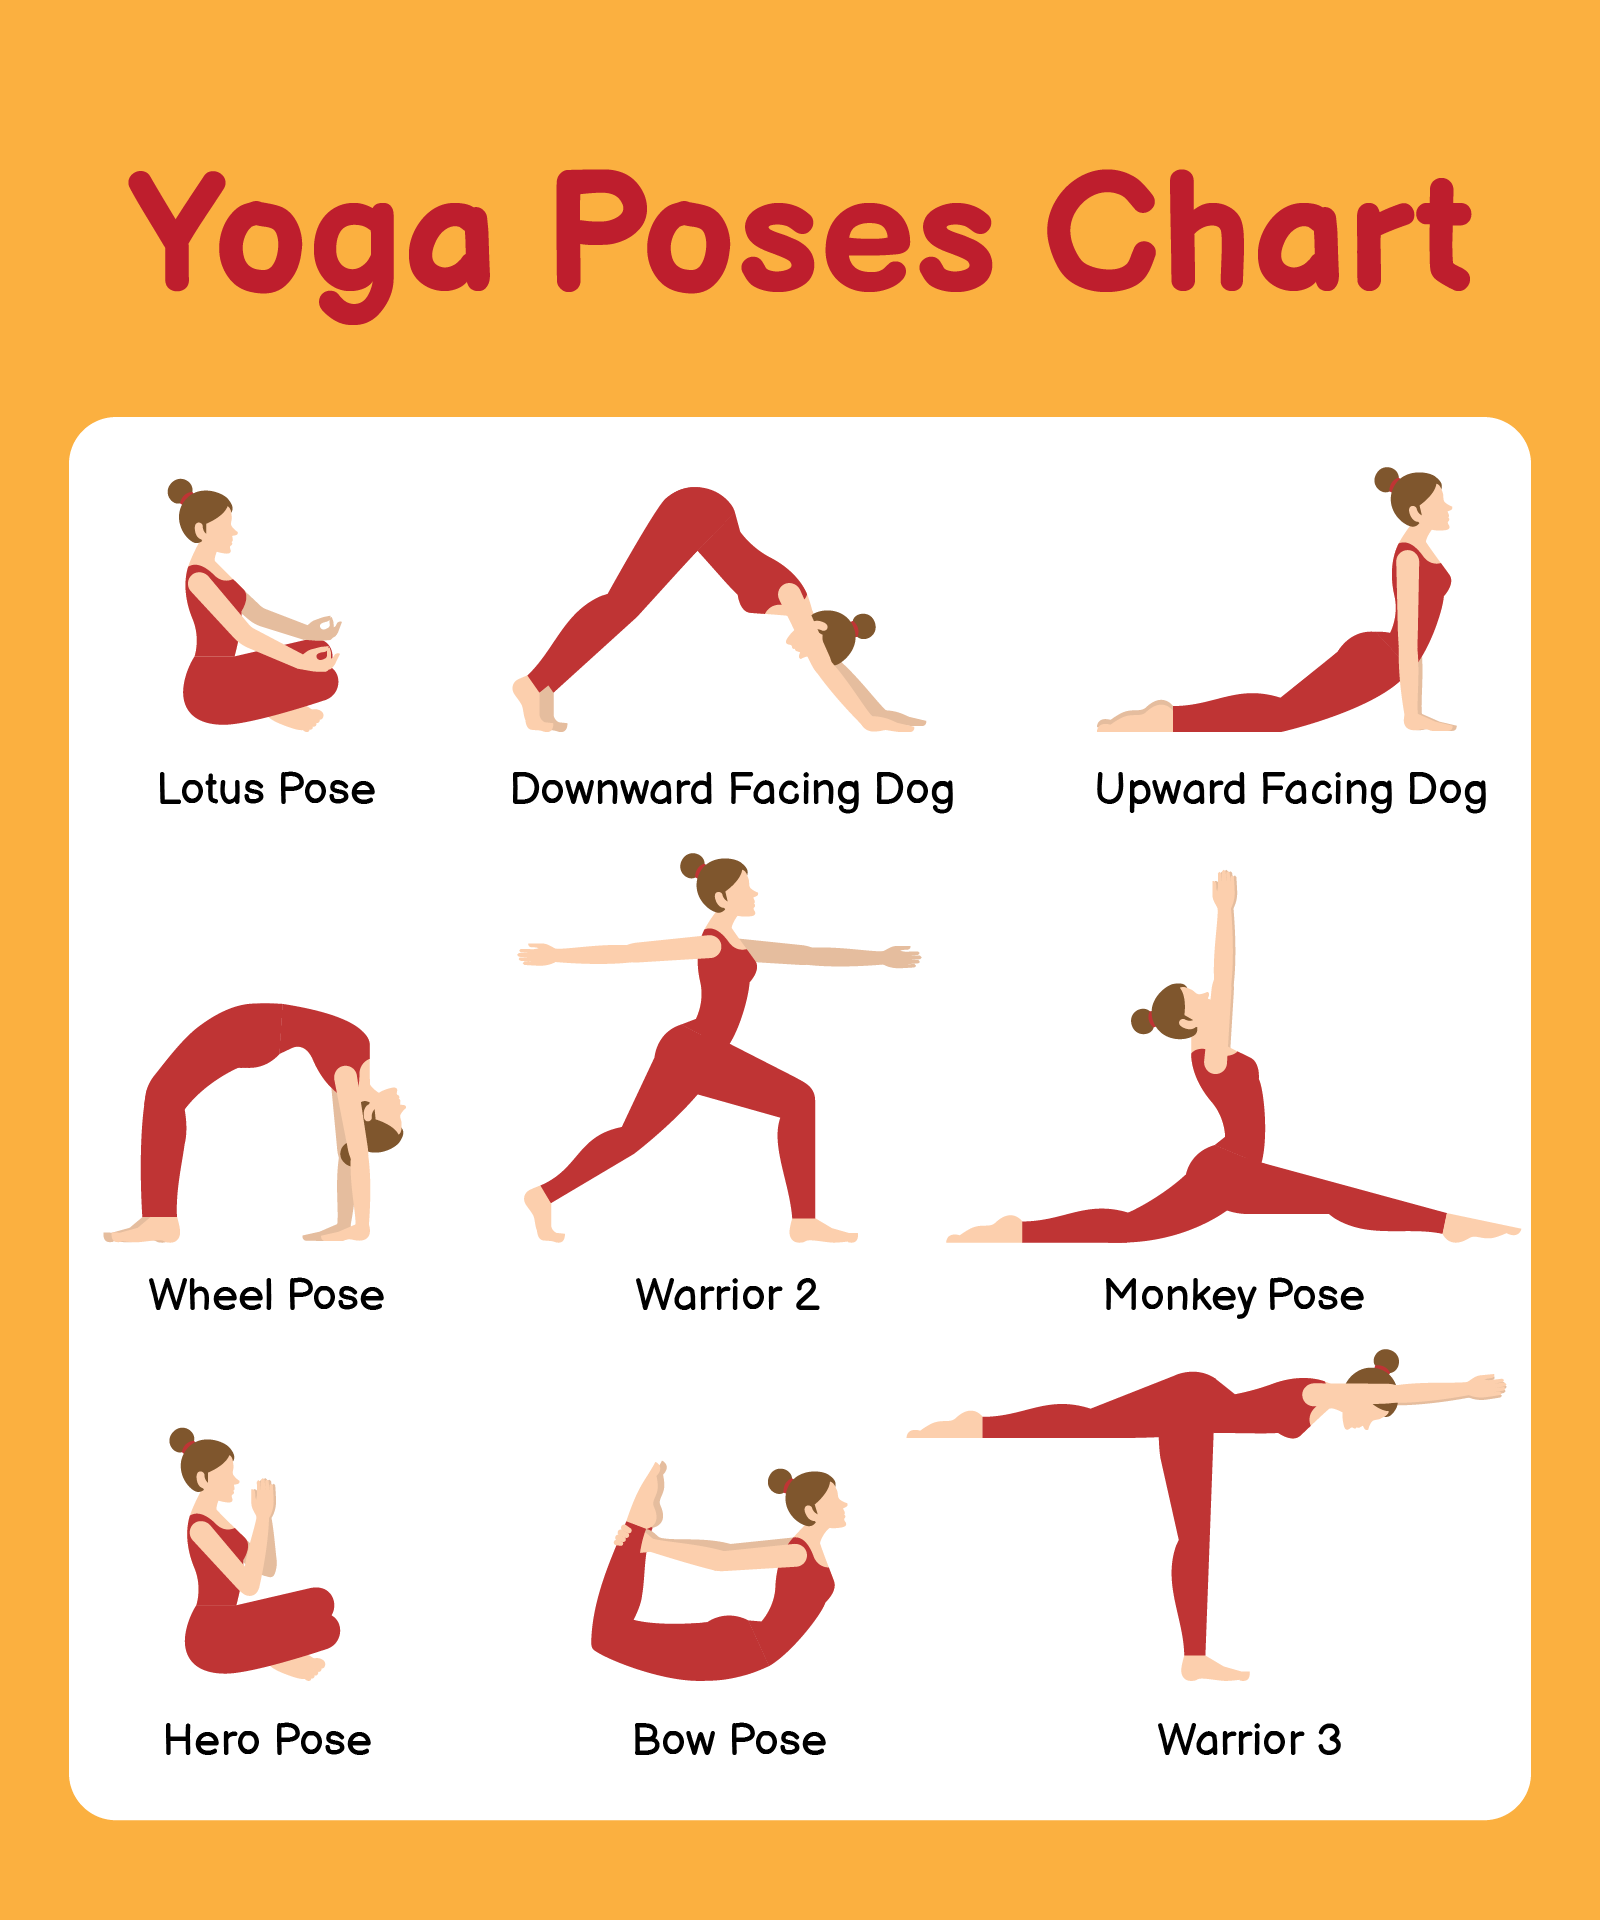 Antelope Valley Partners for Health - Happy International Yoga Day  🧘‍♀️🧘‍♂️ Here are some simple poses to add to your yoga routine ✨ What's  your favorite yoga pose?? #internationalyogaday #yogaposes #namaste  #dailyyoga #